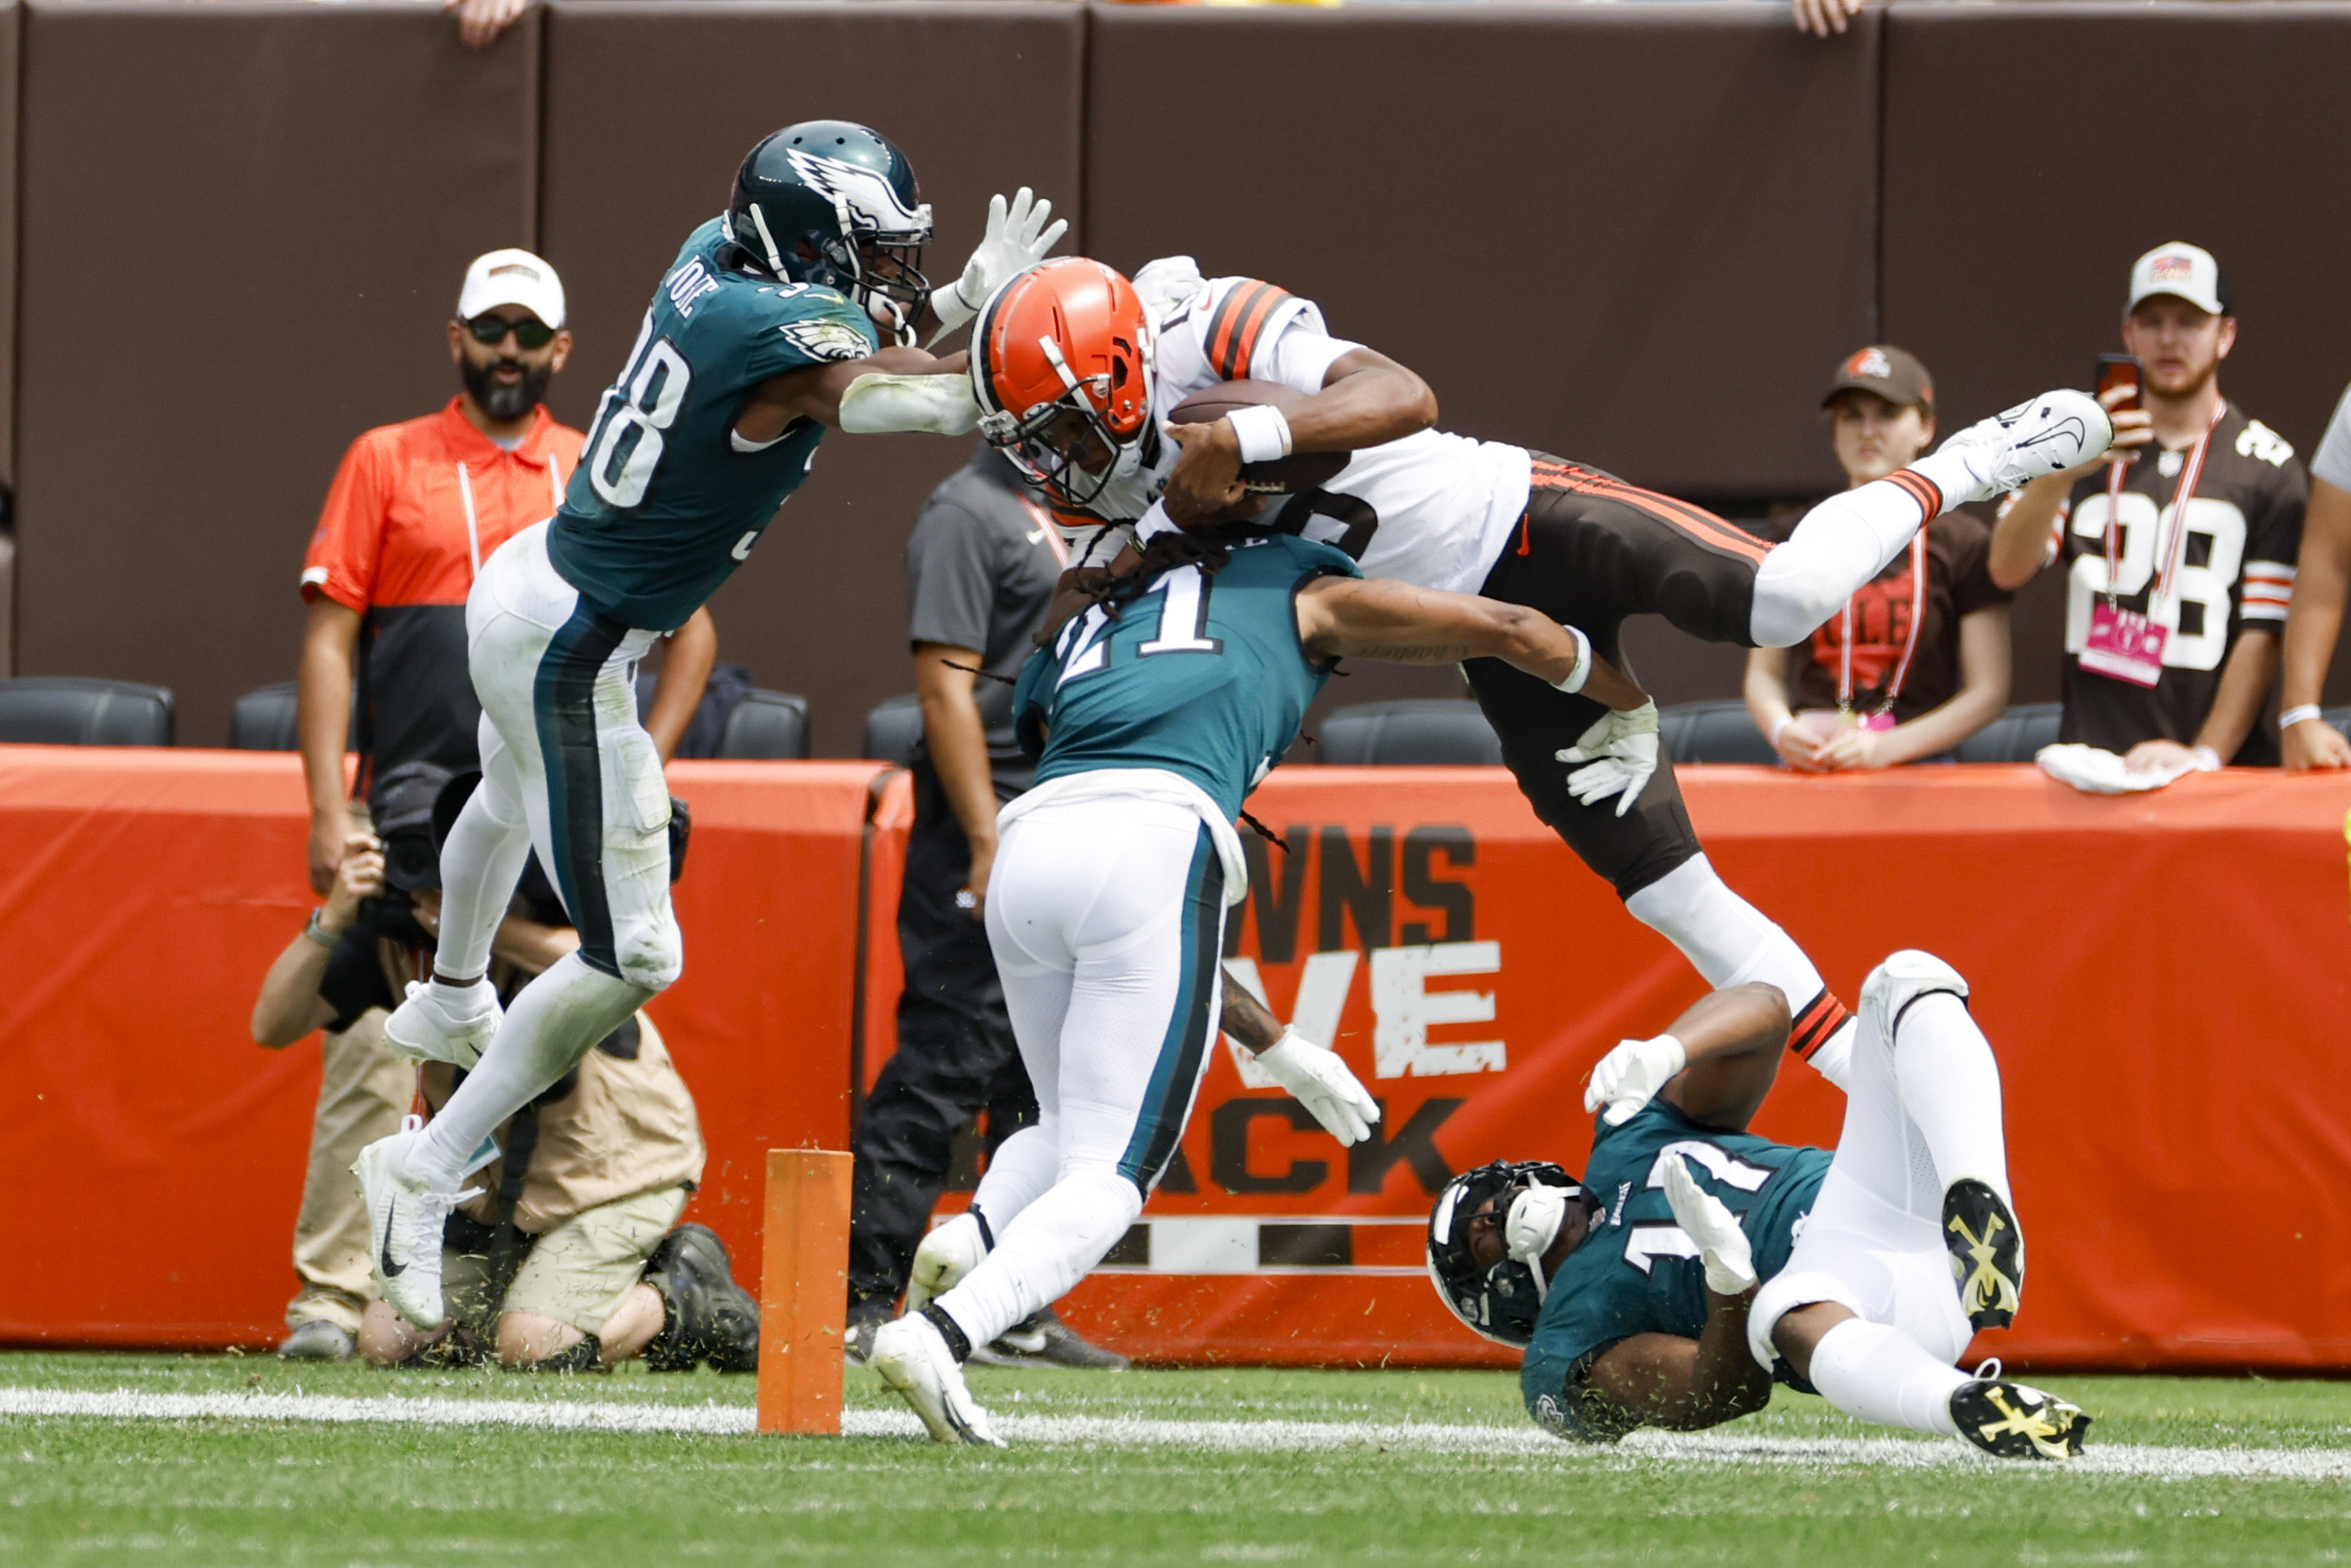 Eagles' Gardner Minshew, reserves lead team to 21-20 win over Browns  without Jalen Hurts